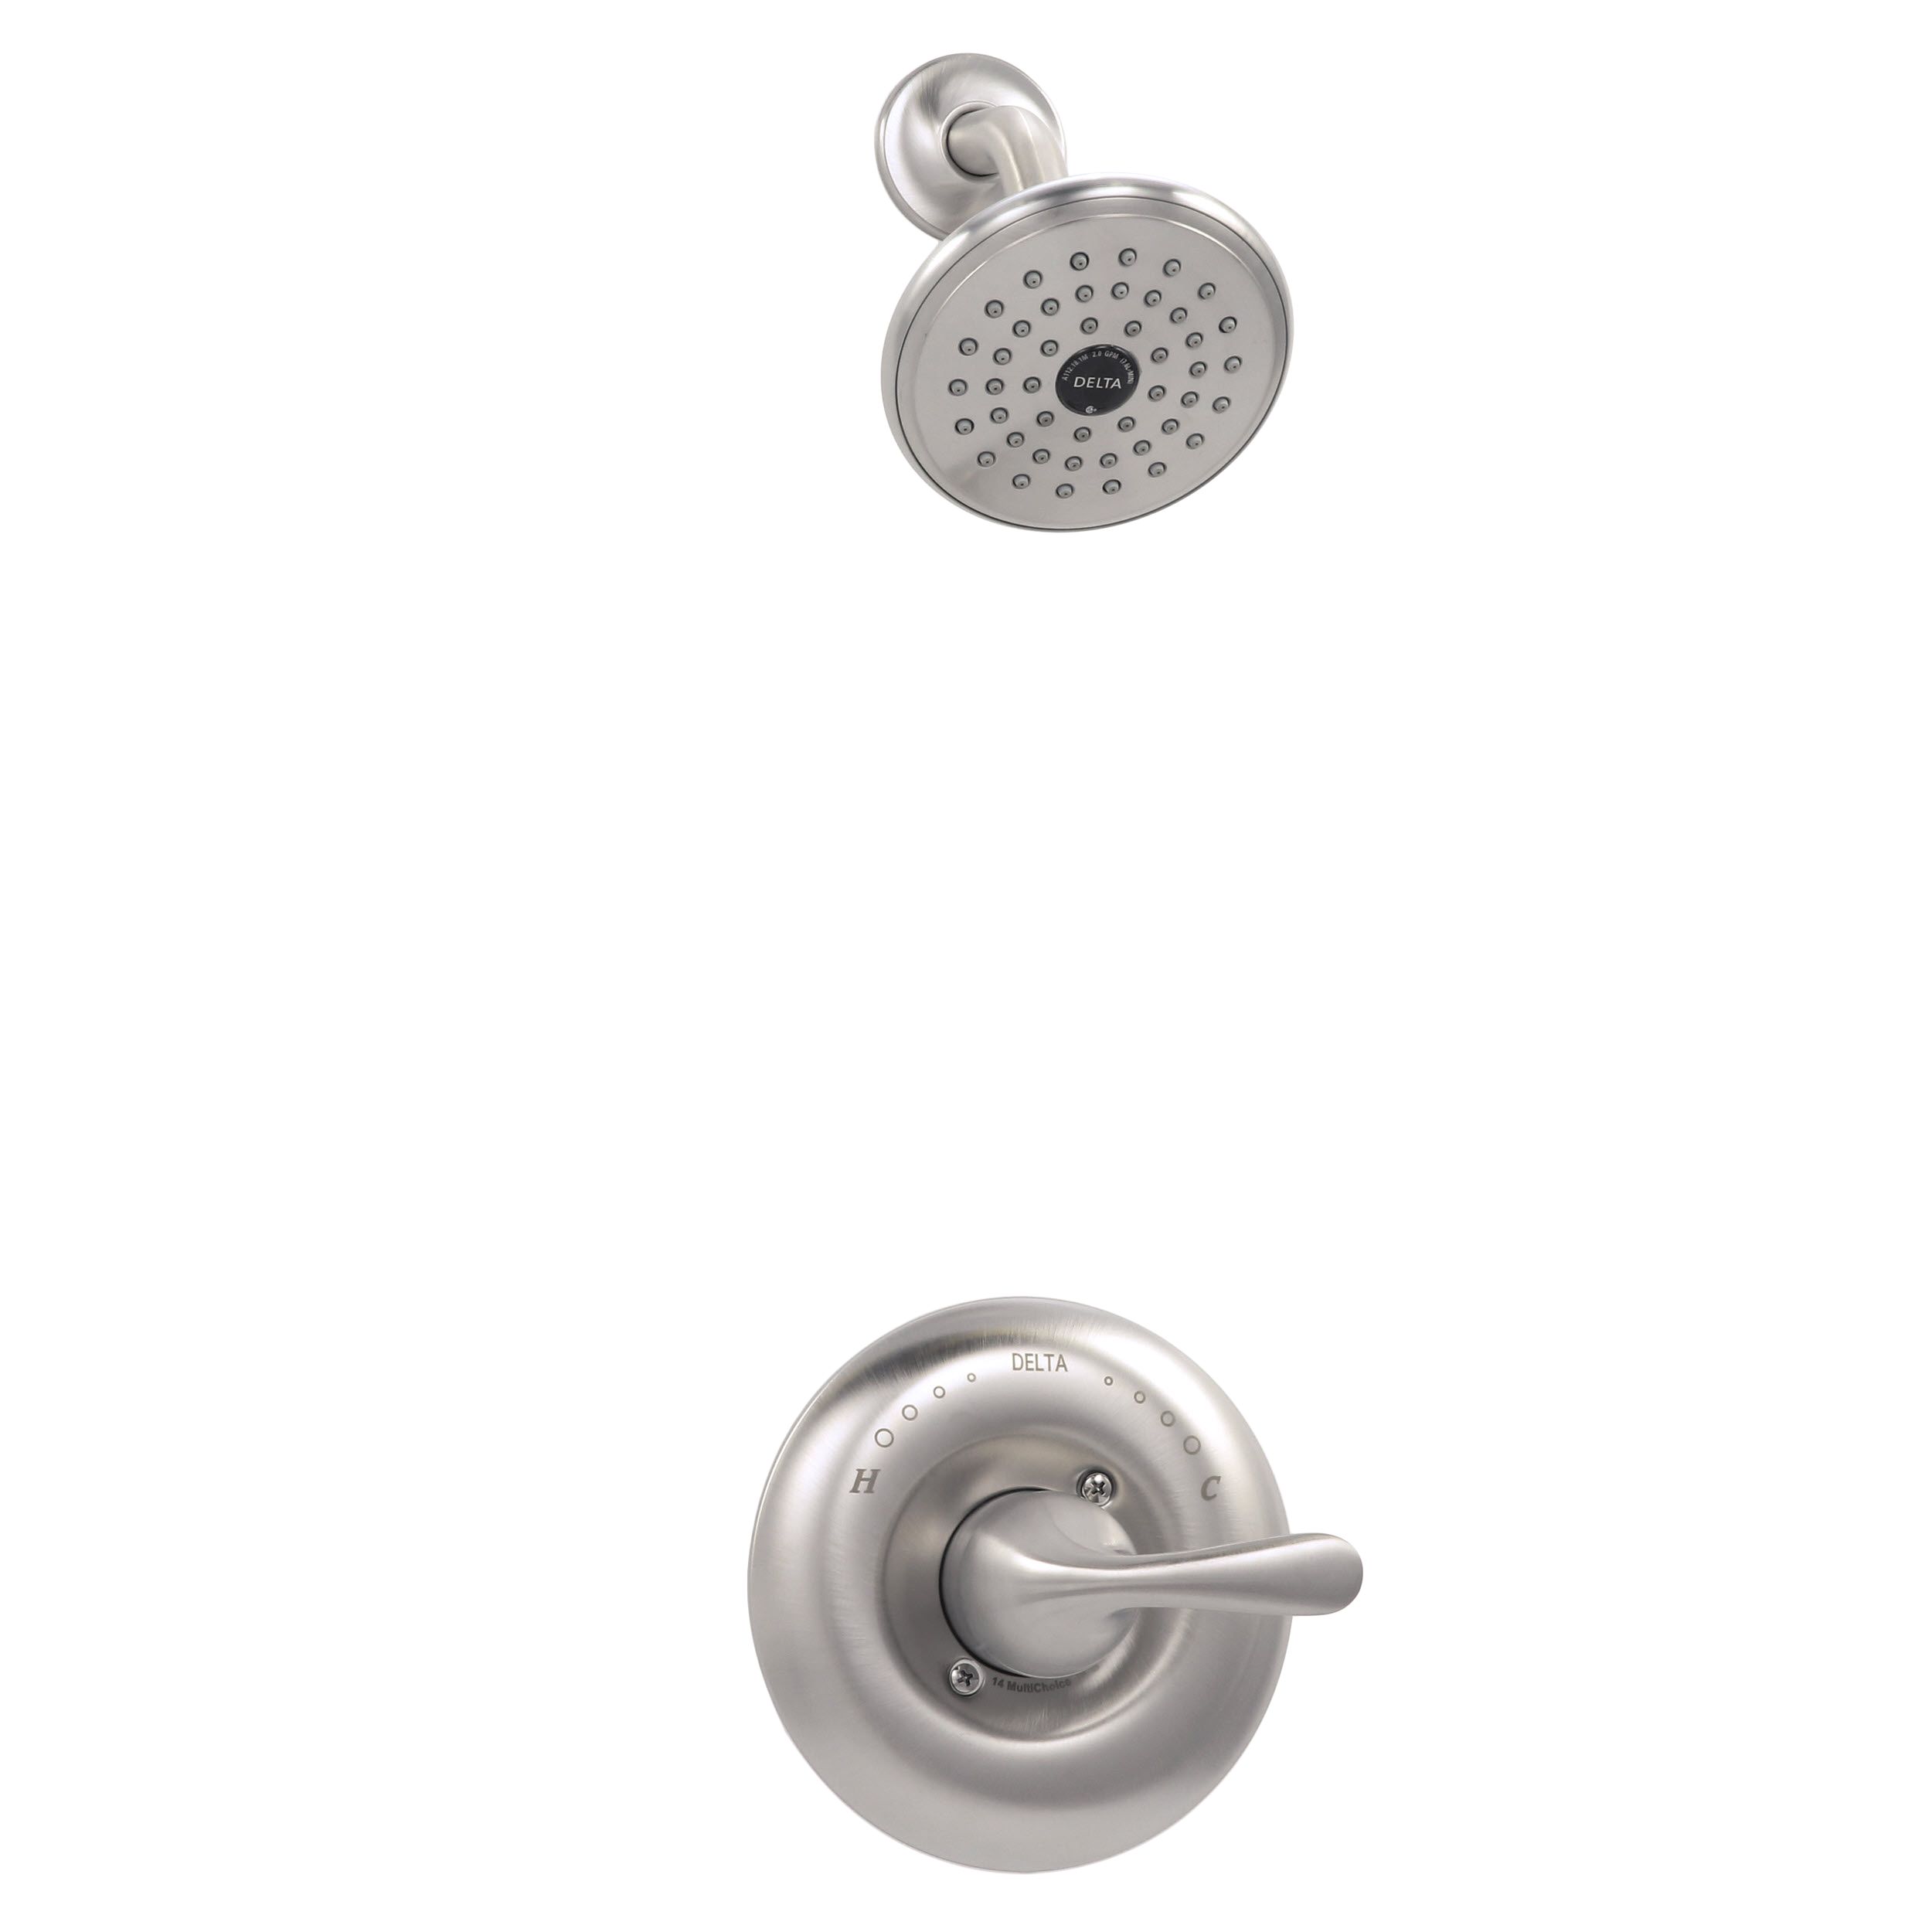 Delta Classic 1-Handle Shower Faucet with Valve in Brushed Nickel 142910C-SS 